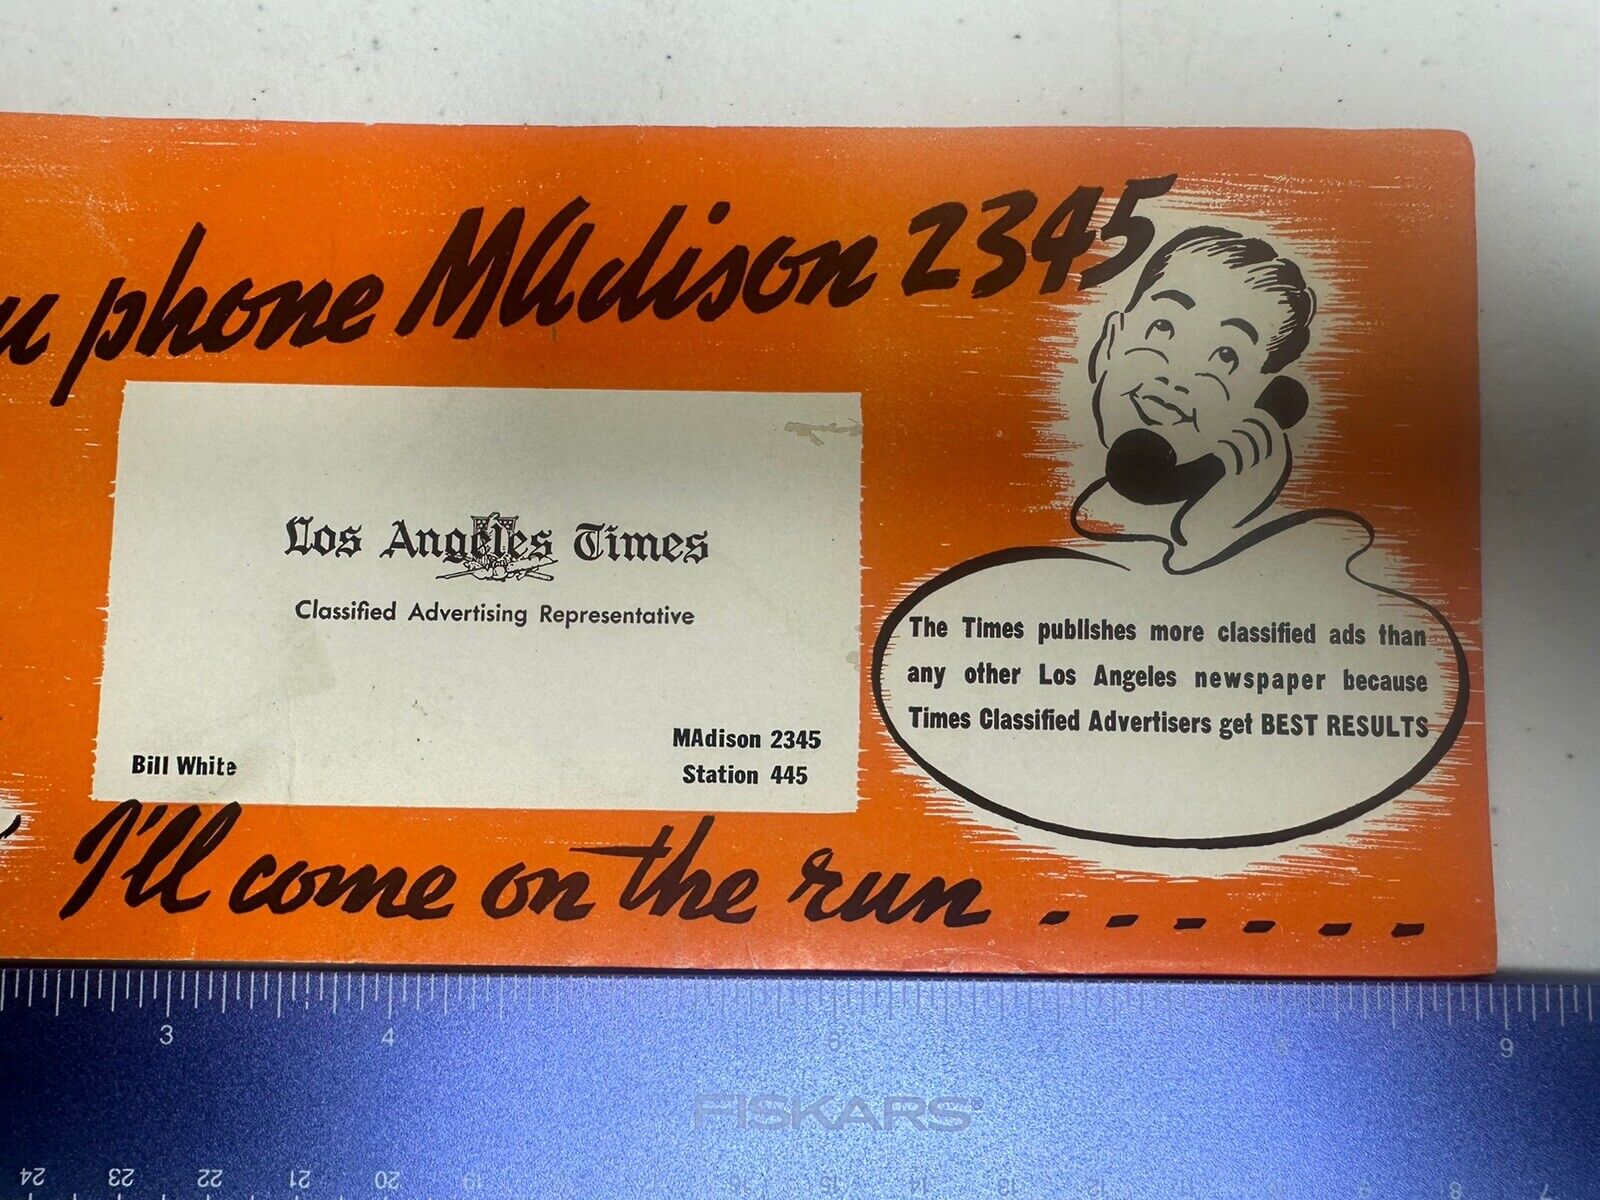 Vintage 1950s Los Angeles Times Business Card - Mid-Century Media Collectible with Original Madison 2345 Ad - TreasuTiques